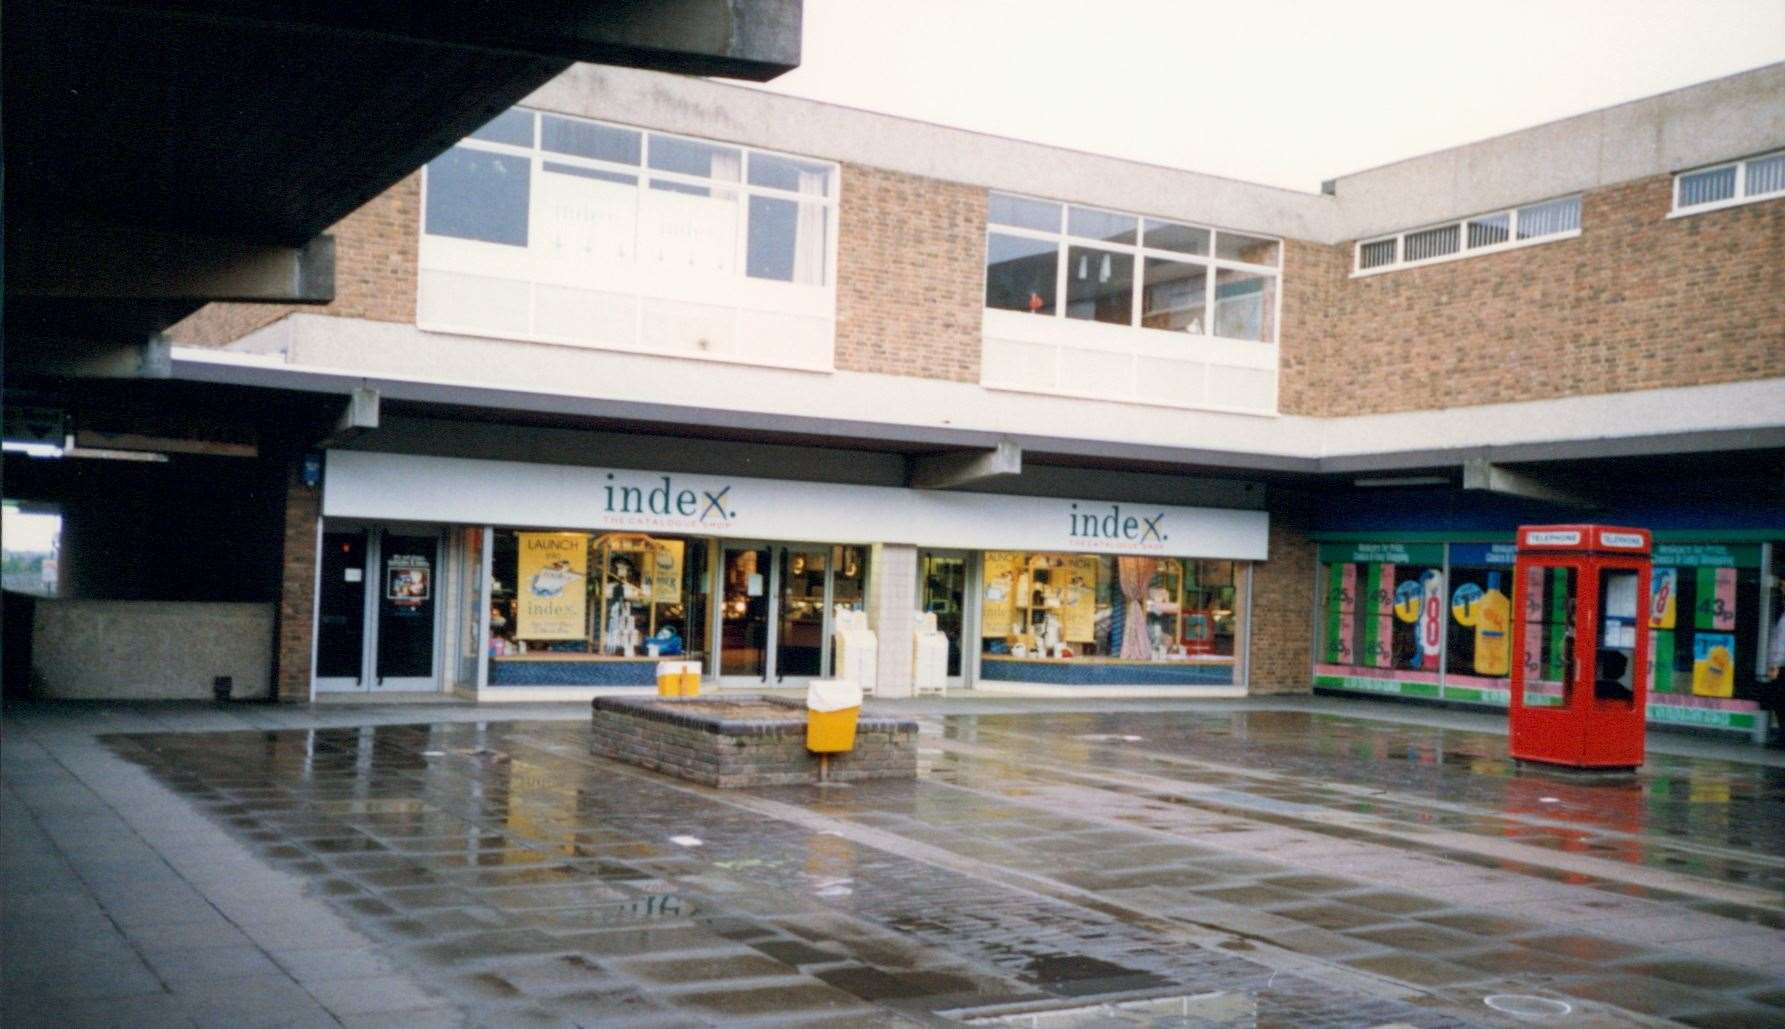 1988 - A final look at the south square of the Tufton Centre before demolition contractors moved in to excavate a lift shaft in this area. Waterstones now fills the Index catalogue shop illustrated here. Before that, the Presto supermarket occupied this unit, with the Carlton Restaurant above. Picture: Steve Salter